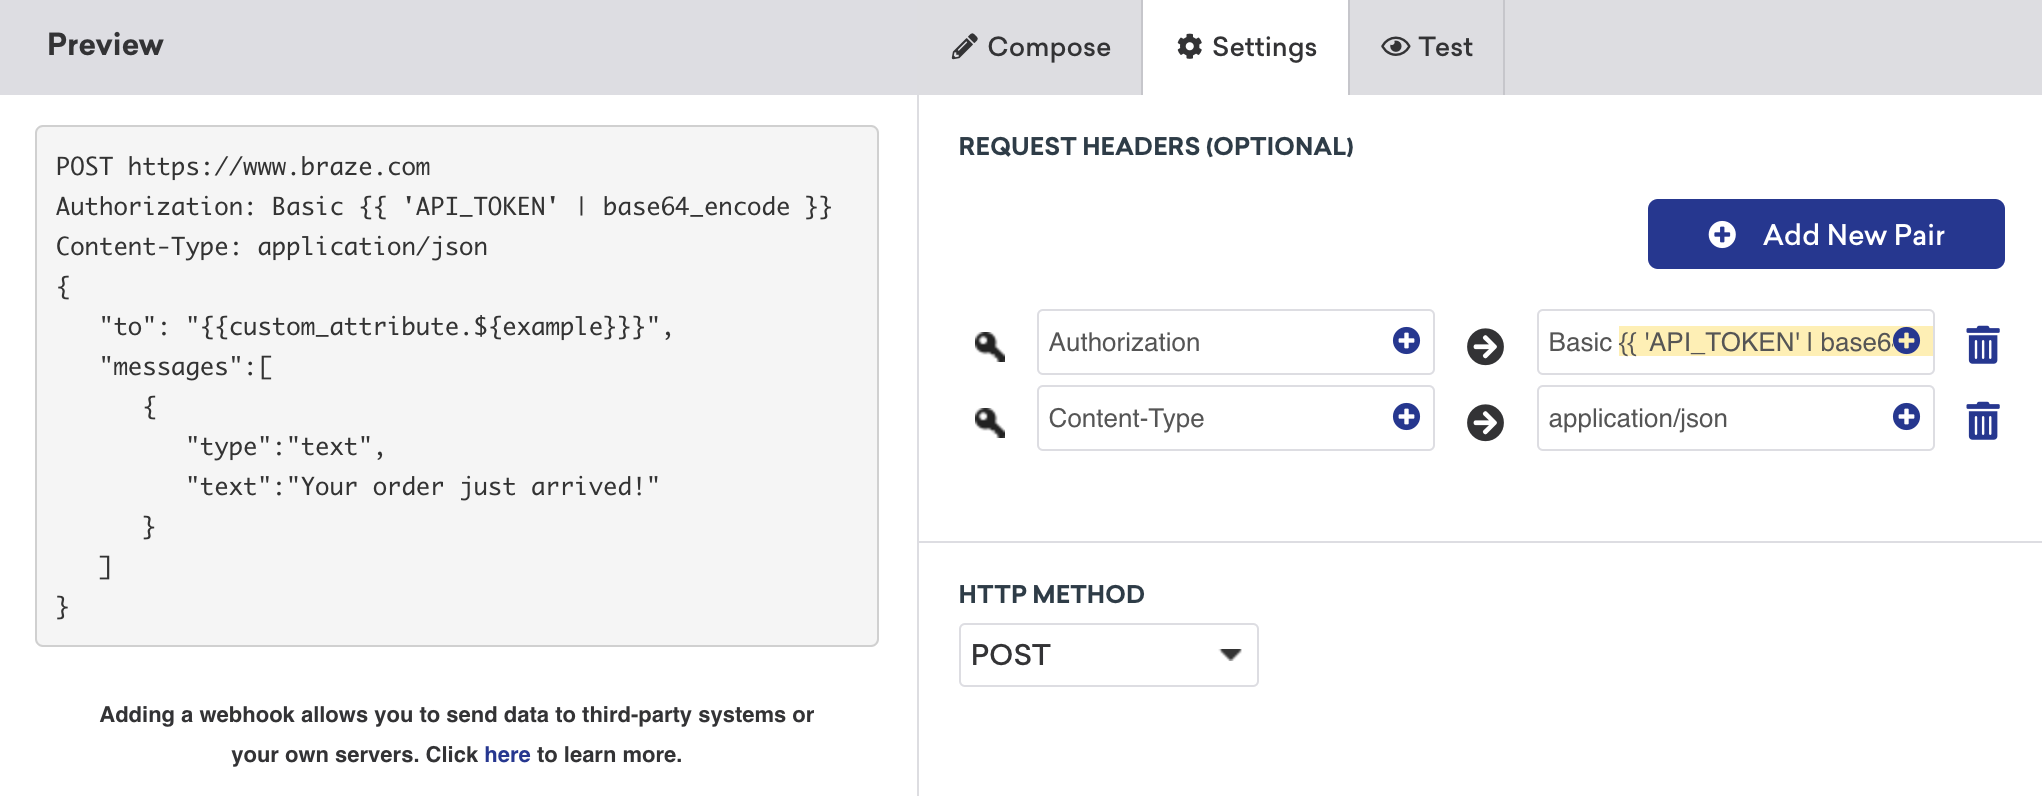 Specify request headers and HTTP method in the Settings tab of the composer